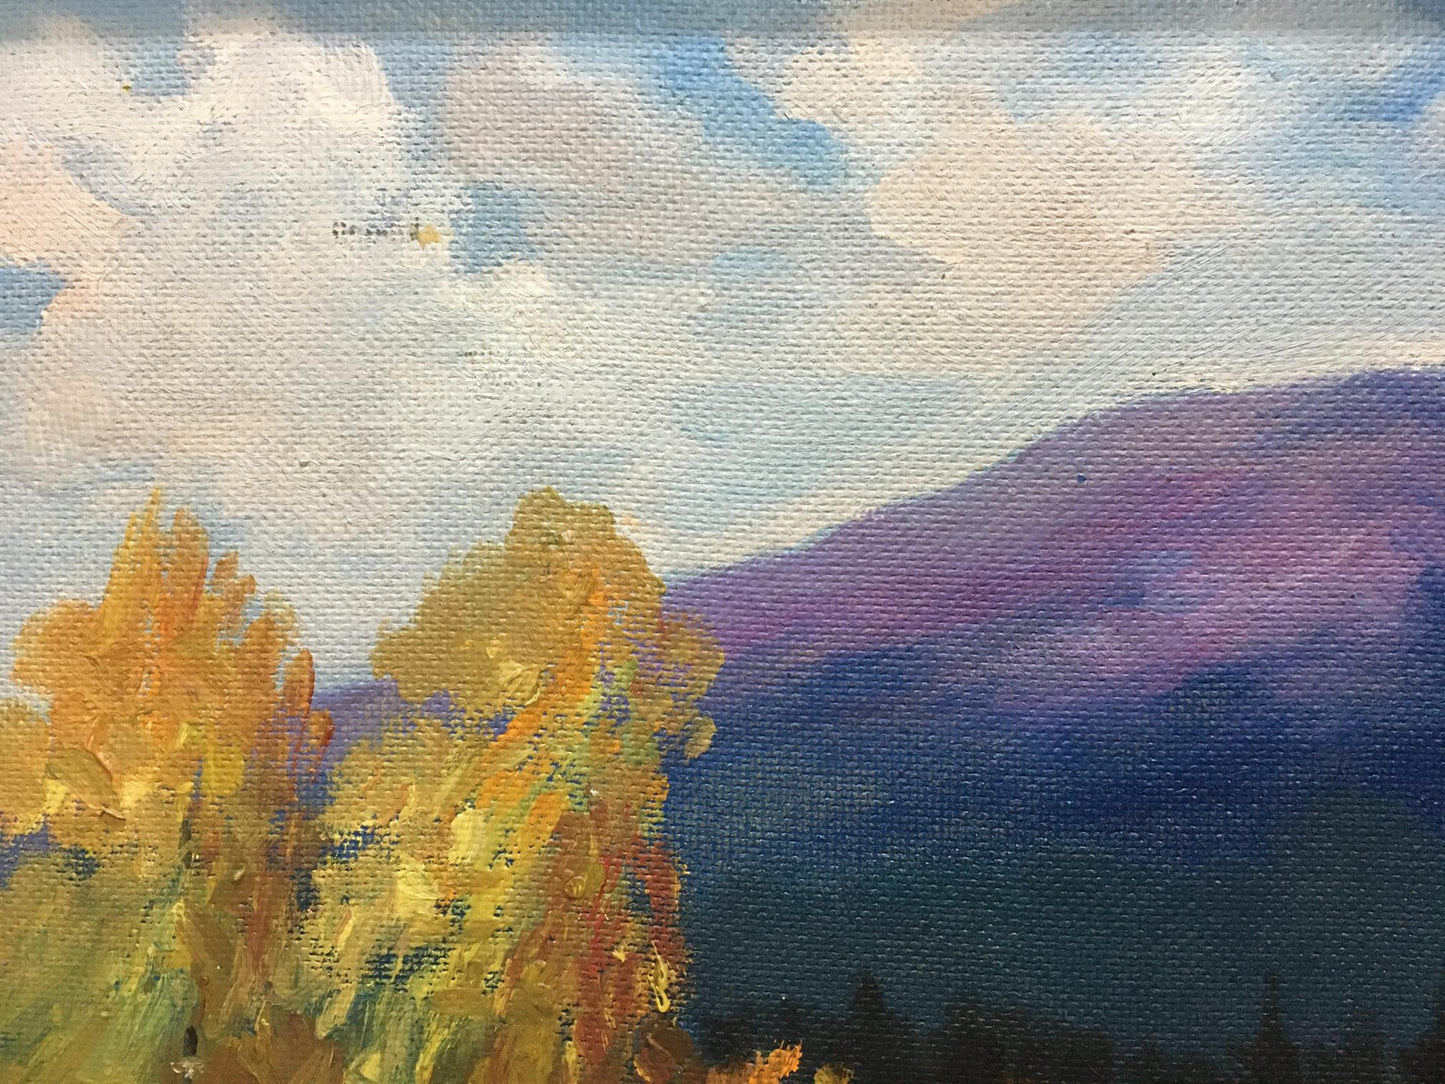 Oil painting Autumn in the mountains Unknown artist